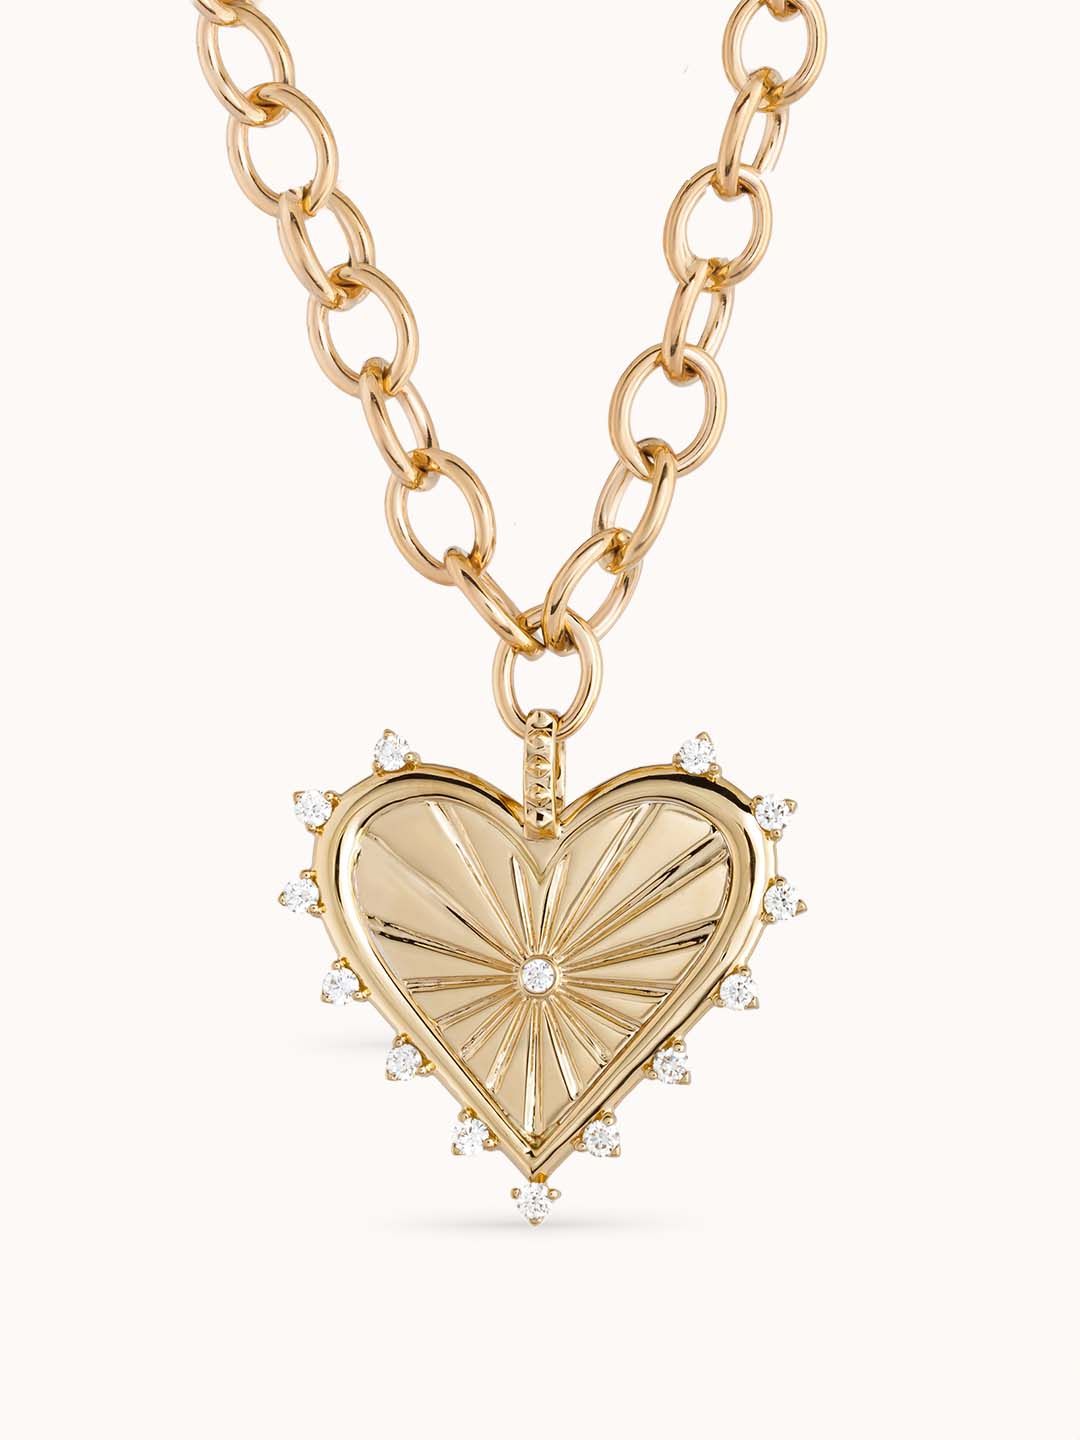 Buy 14k Solid Gold Heart Necklace for Women Puffed Heart Pendant Necklace  14K Real Gold Heart Jewelry Gold Love Necklace Valentines Gift Online in  India - Etsy